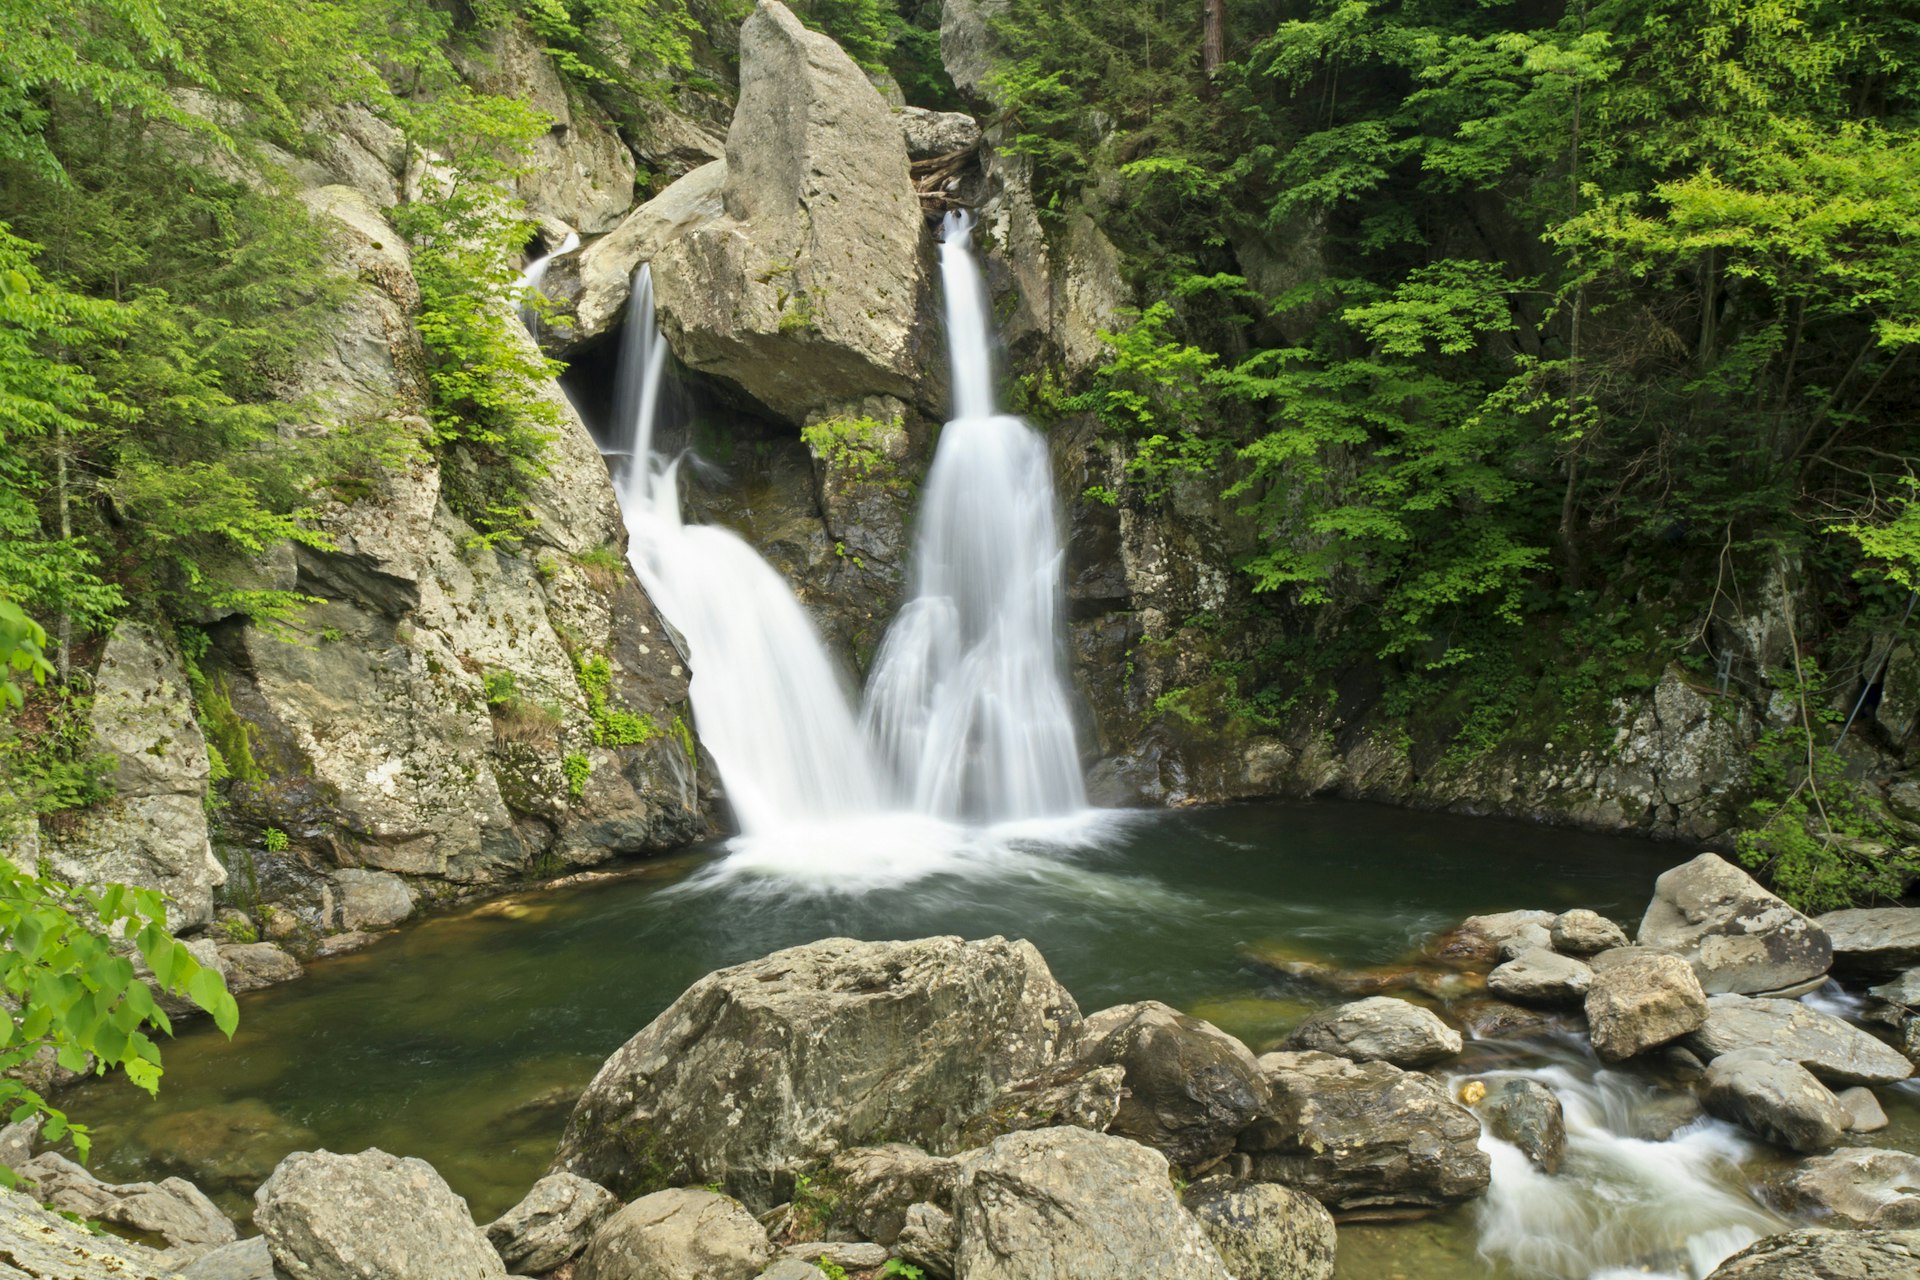 Bish Bash Falls is a popular summer swimming hole in the Berkshires, and the tallest waterfalls in Massachusetts